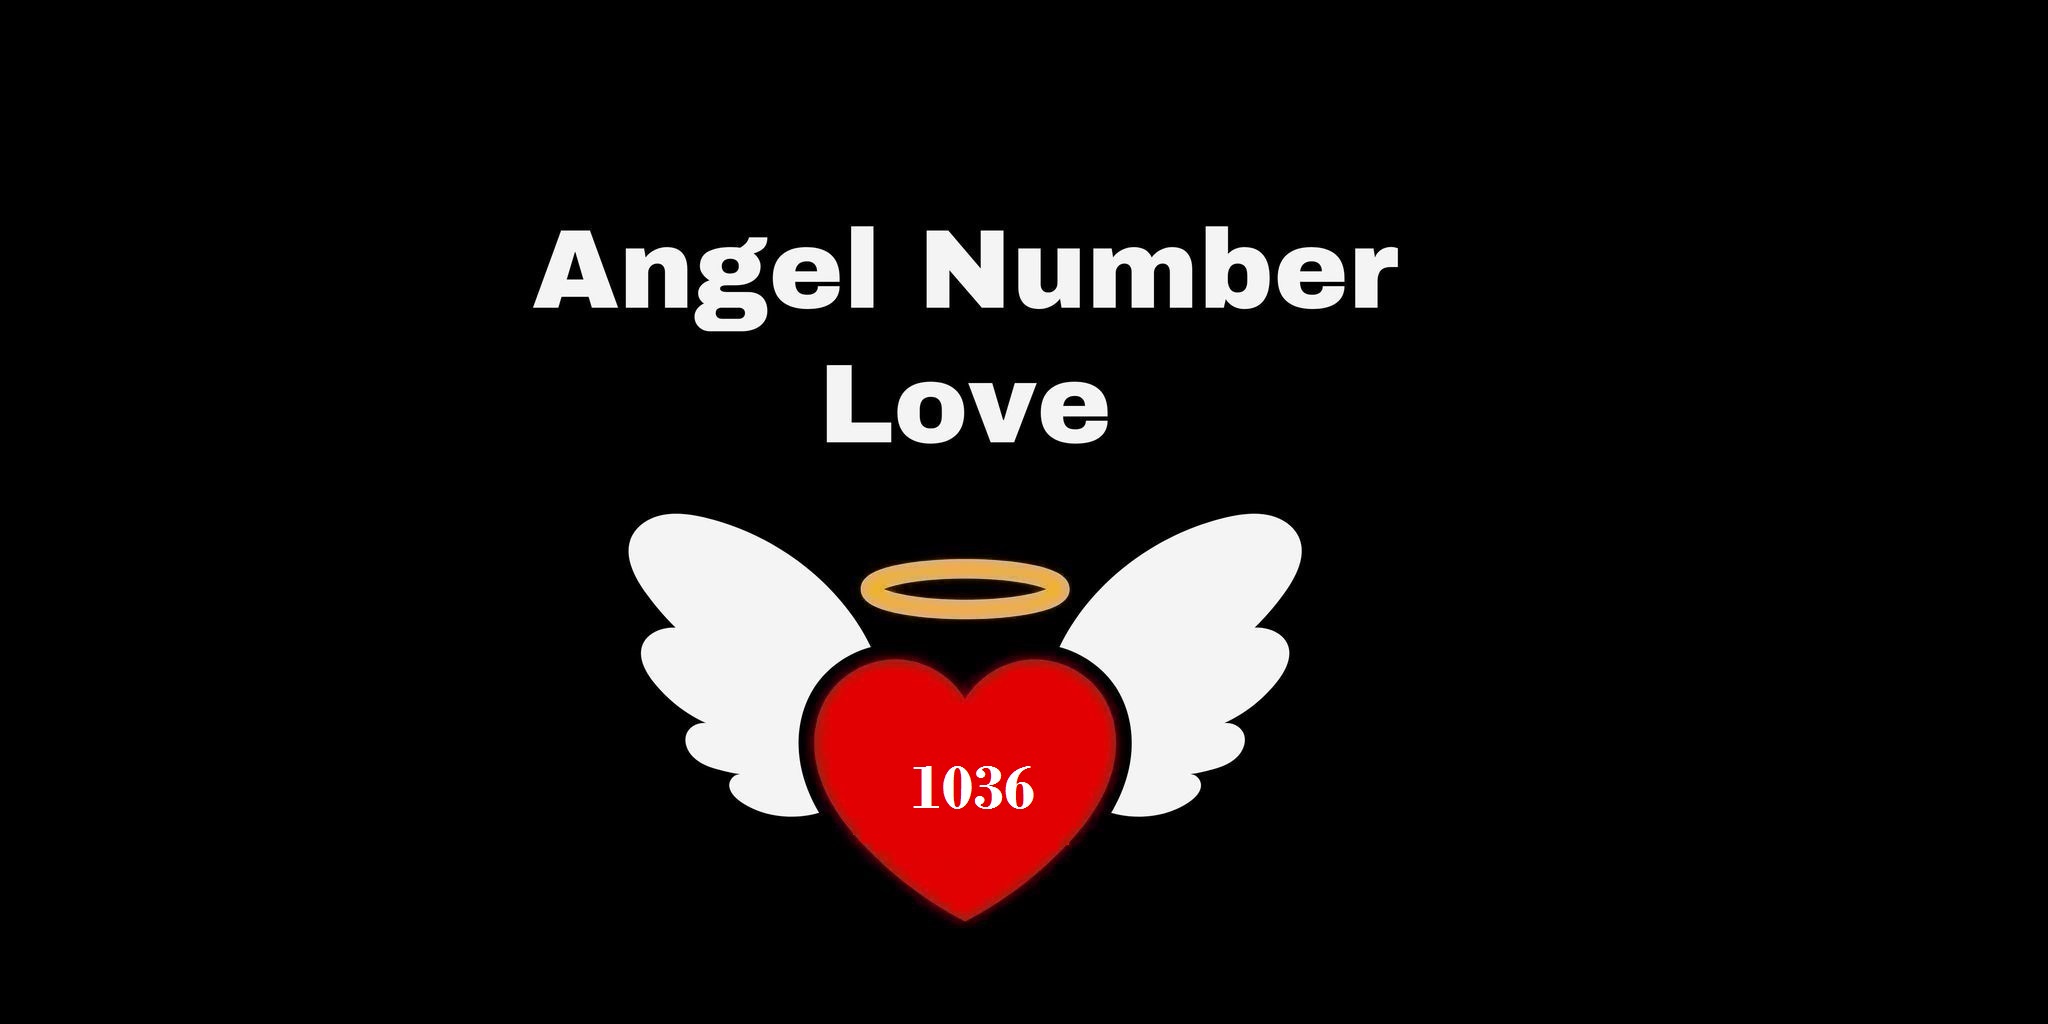 1036 Angel Number Meaning In Love